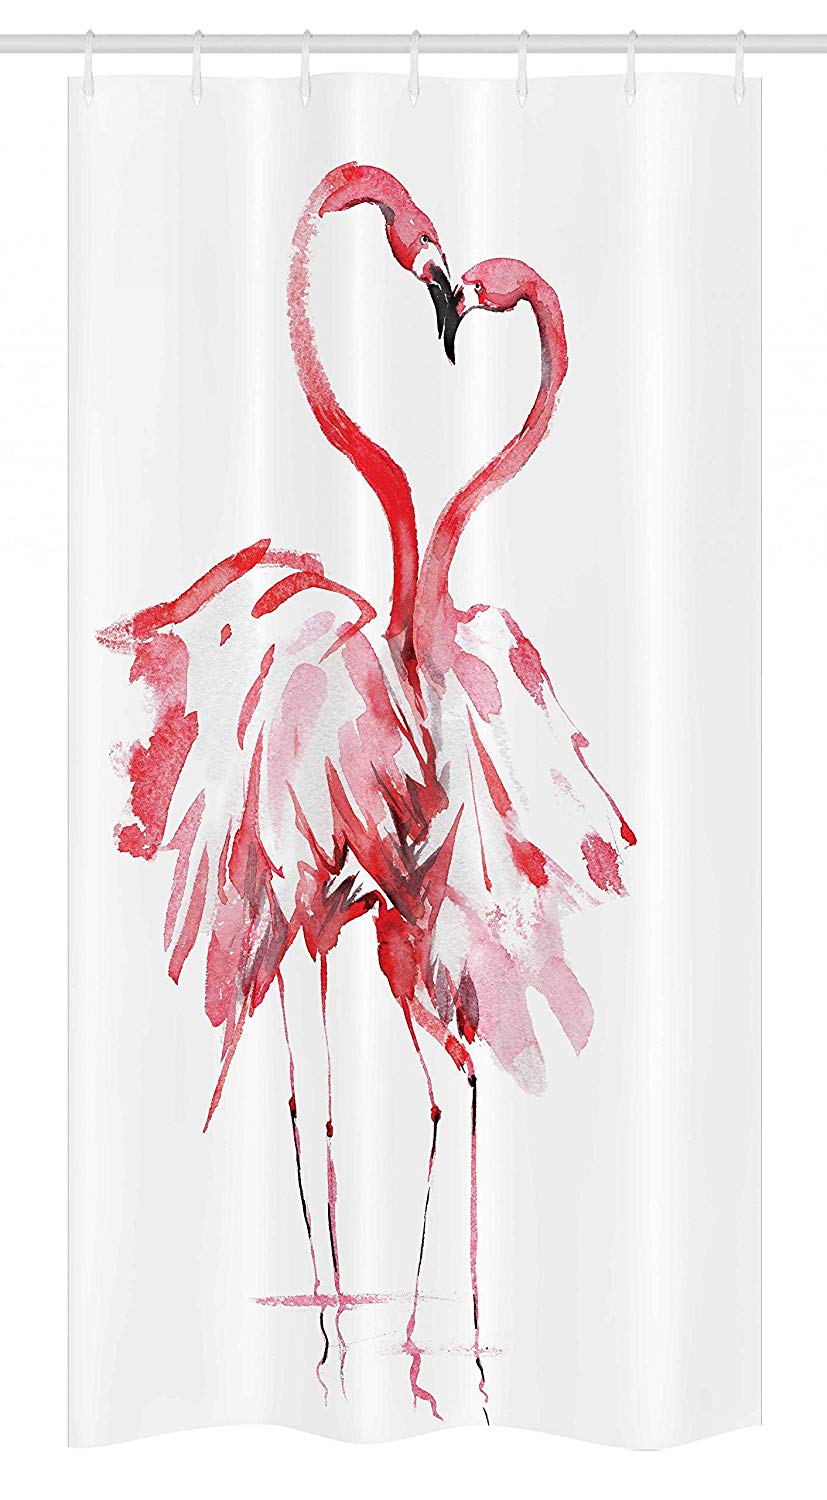 Ambesonne Flamingo Stall Shower Curtain, Flamingo Couple Kissing Romance Passion Partners in Love Watercolor Effect, Fabric Bathroom Decor Set with Hooks, 36